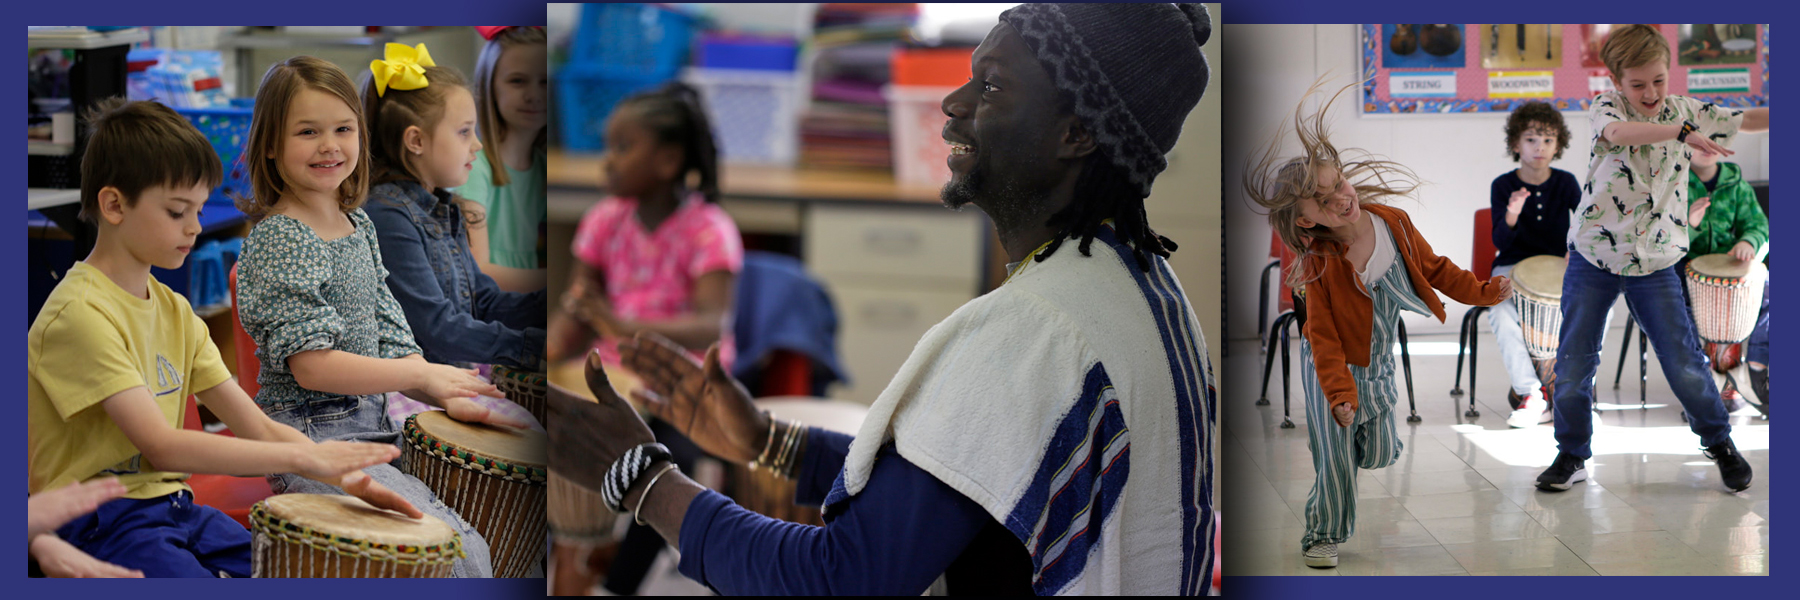 Triptych of Diali Cissokho residency; L to R students playing drums; Diali, a black man playing drums in front of seated students; male and female students dancing